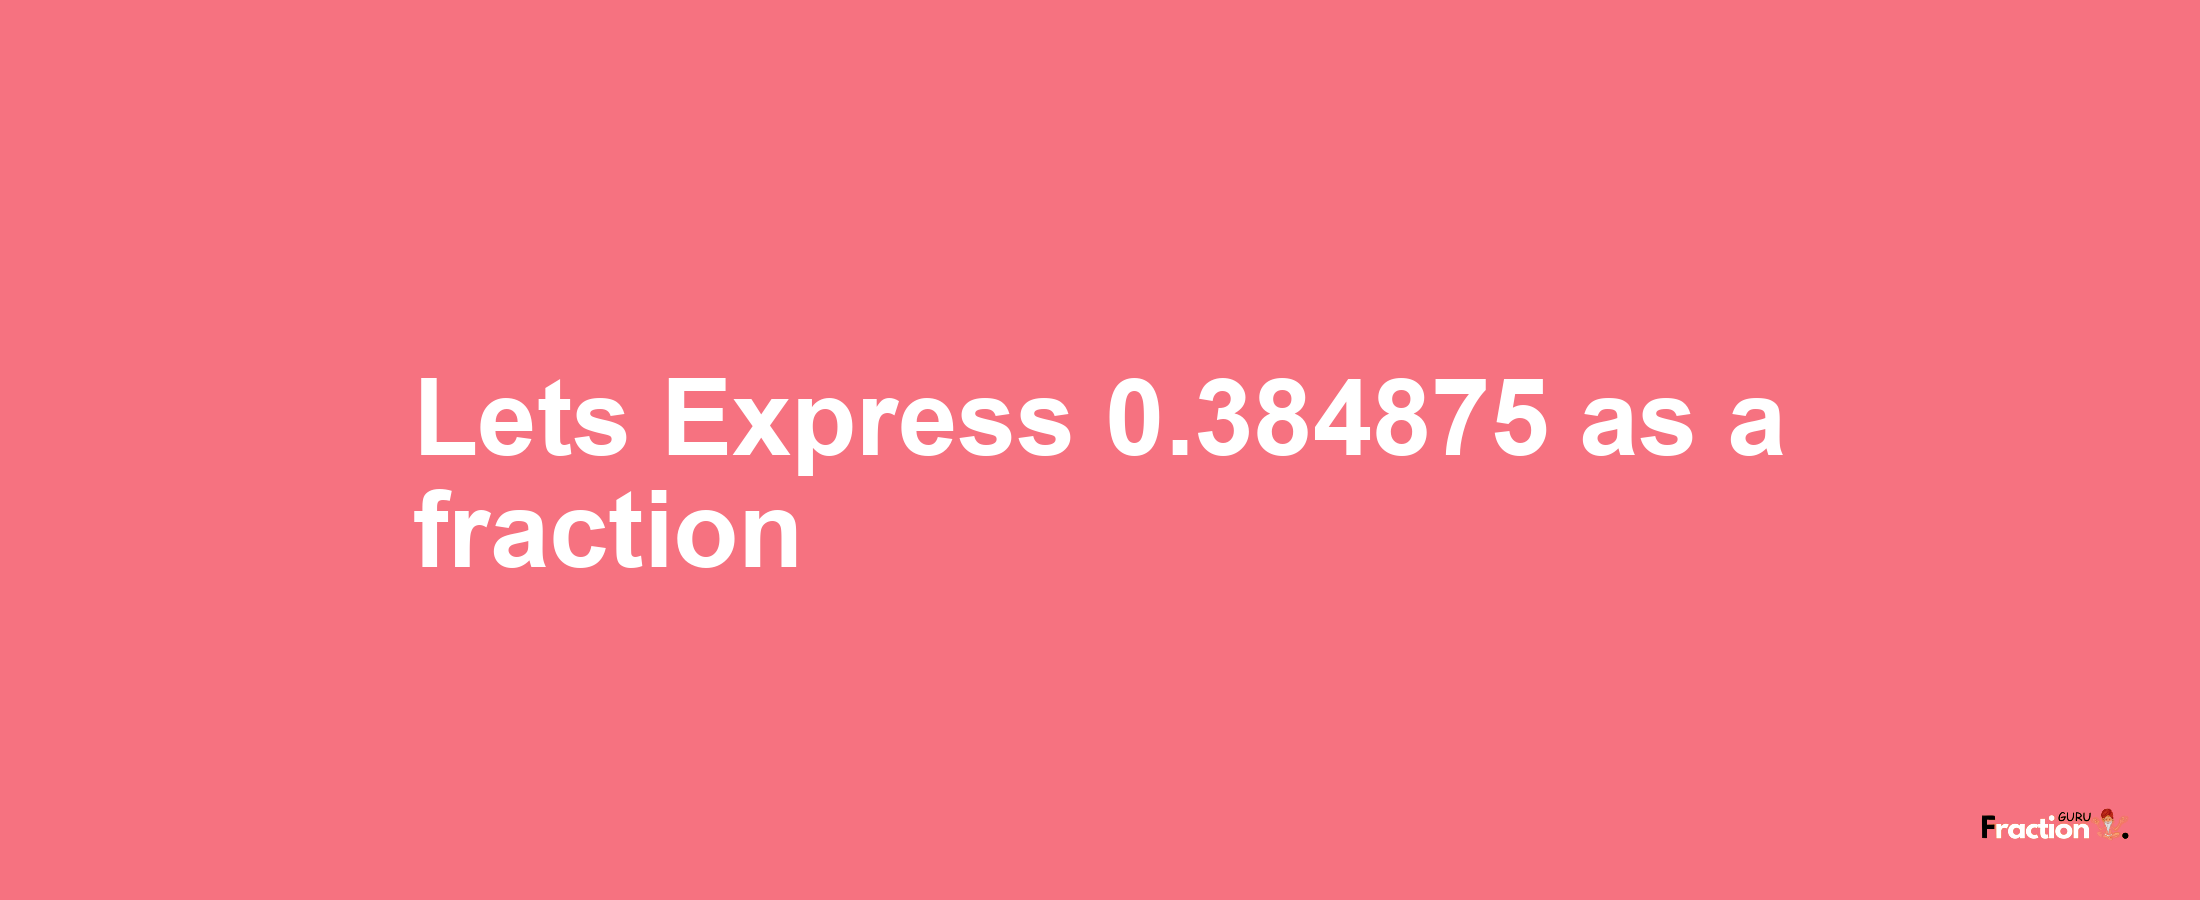 Lets Express 0.384875 as afraction